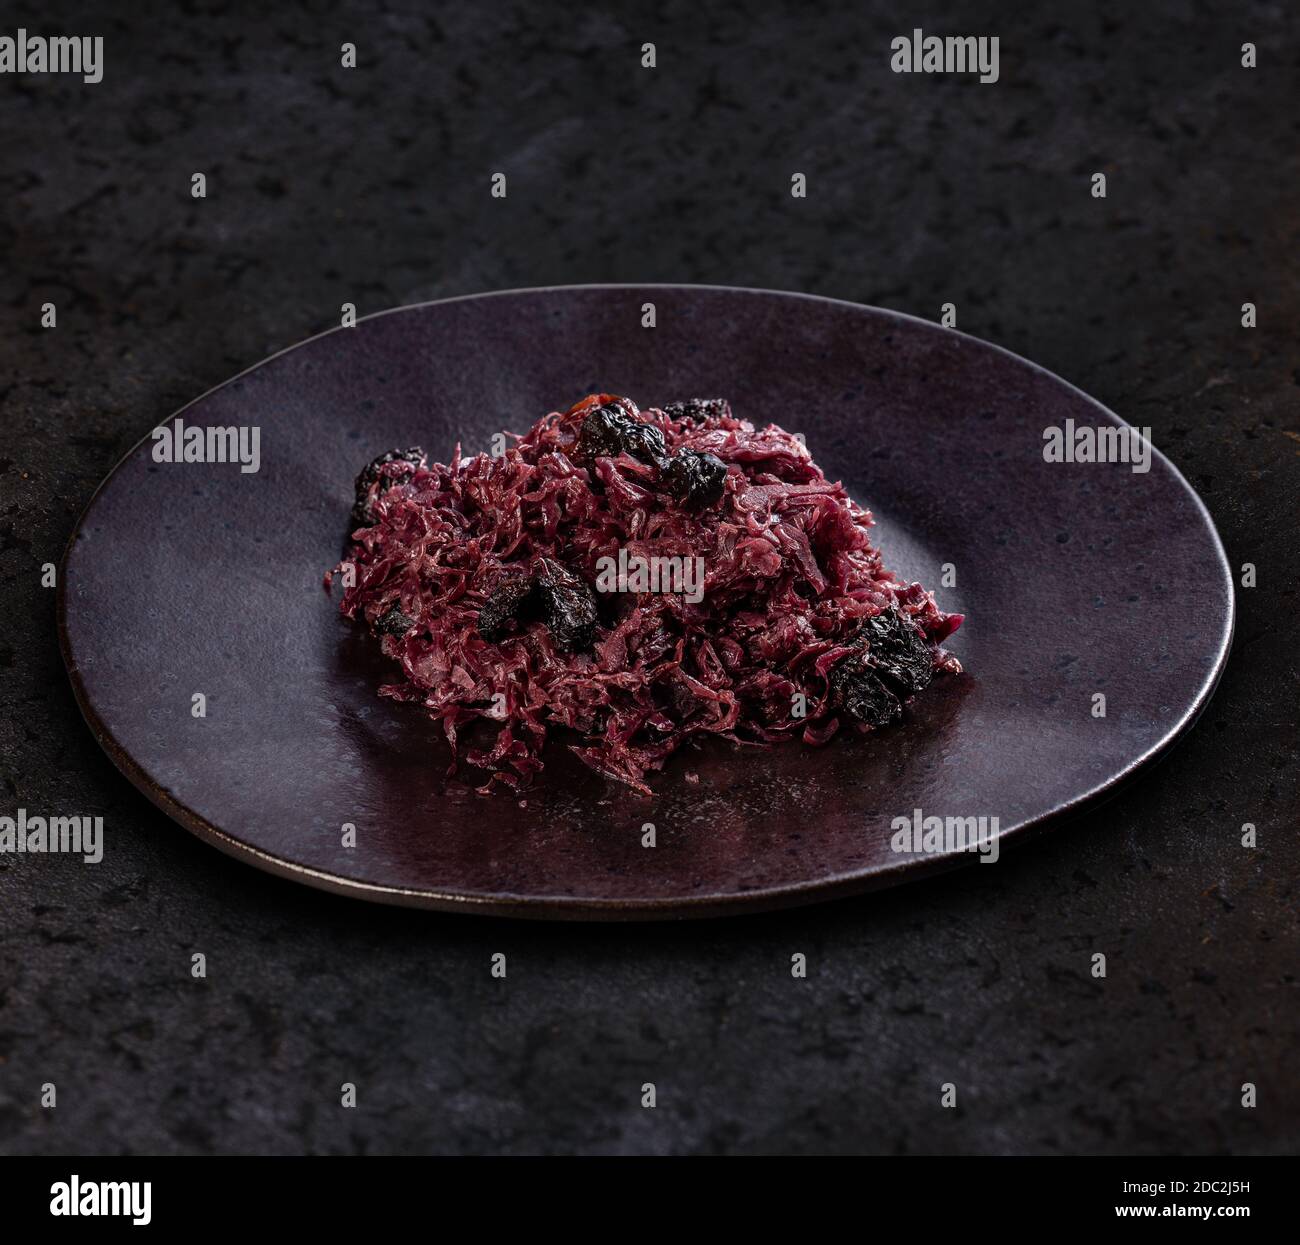 Braised red cabbage with dried prunes on black plate, black background Stock Photo